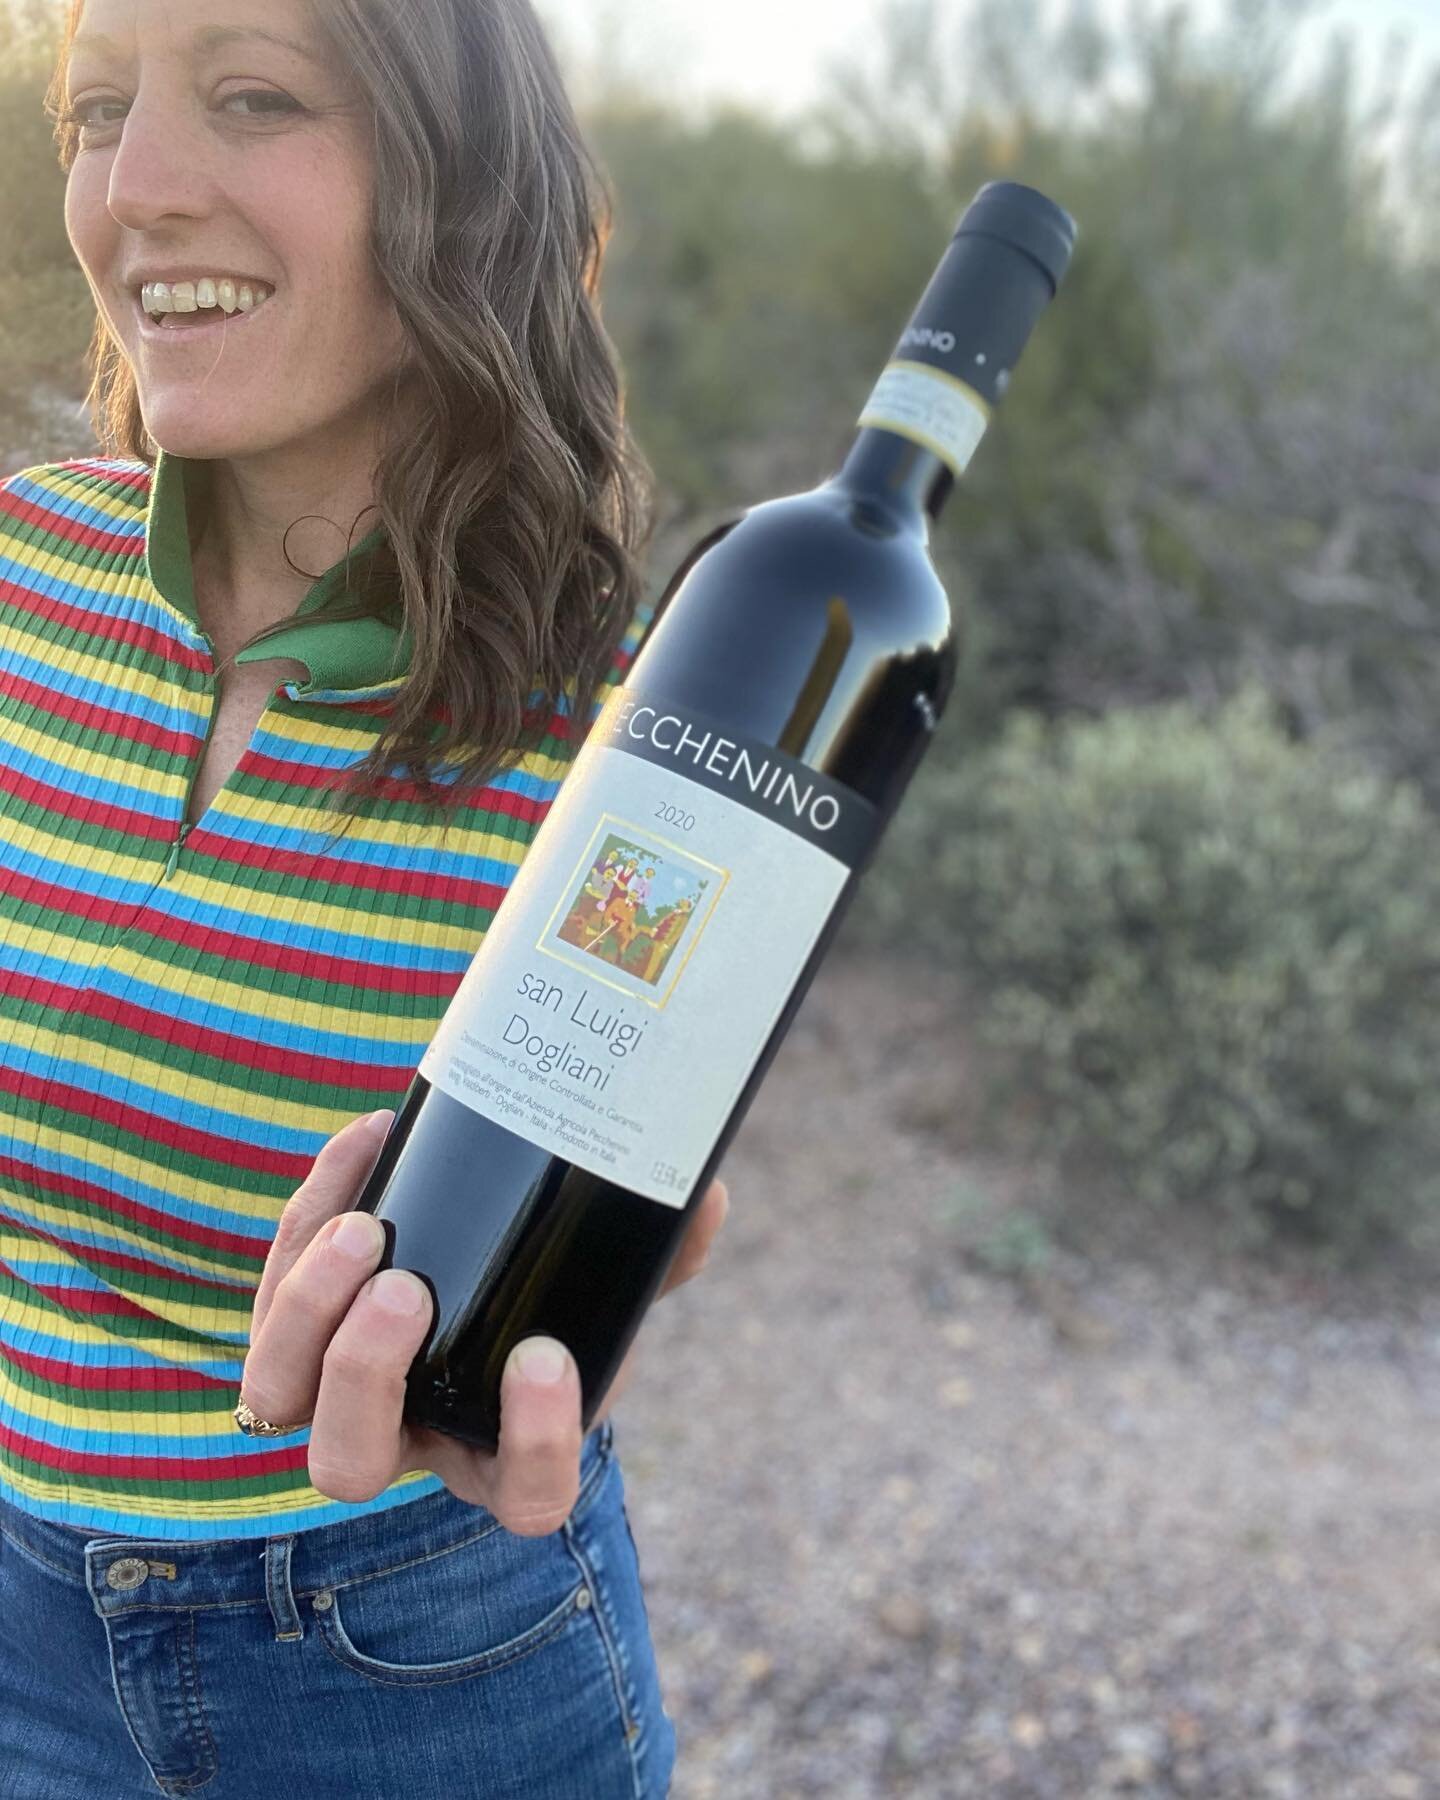 🌵Meanwhile, in Tucson, all I want is Dolcetto&hellip;
.
.
.
👇If you&rsquo;ve never had, or even heard of this variety, keep reading.
.
.
✨✨Dolcetto✨✨
.
🍇Early ripening, red wine variety, native to the Piedmont, Italy 🇮🇹
👉Dolcetto translates to 